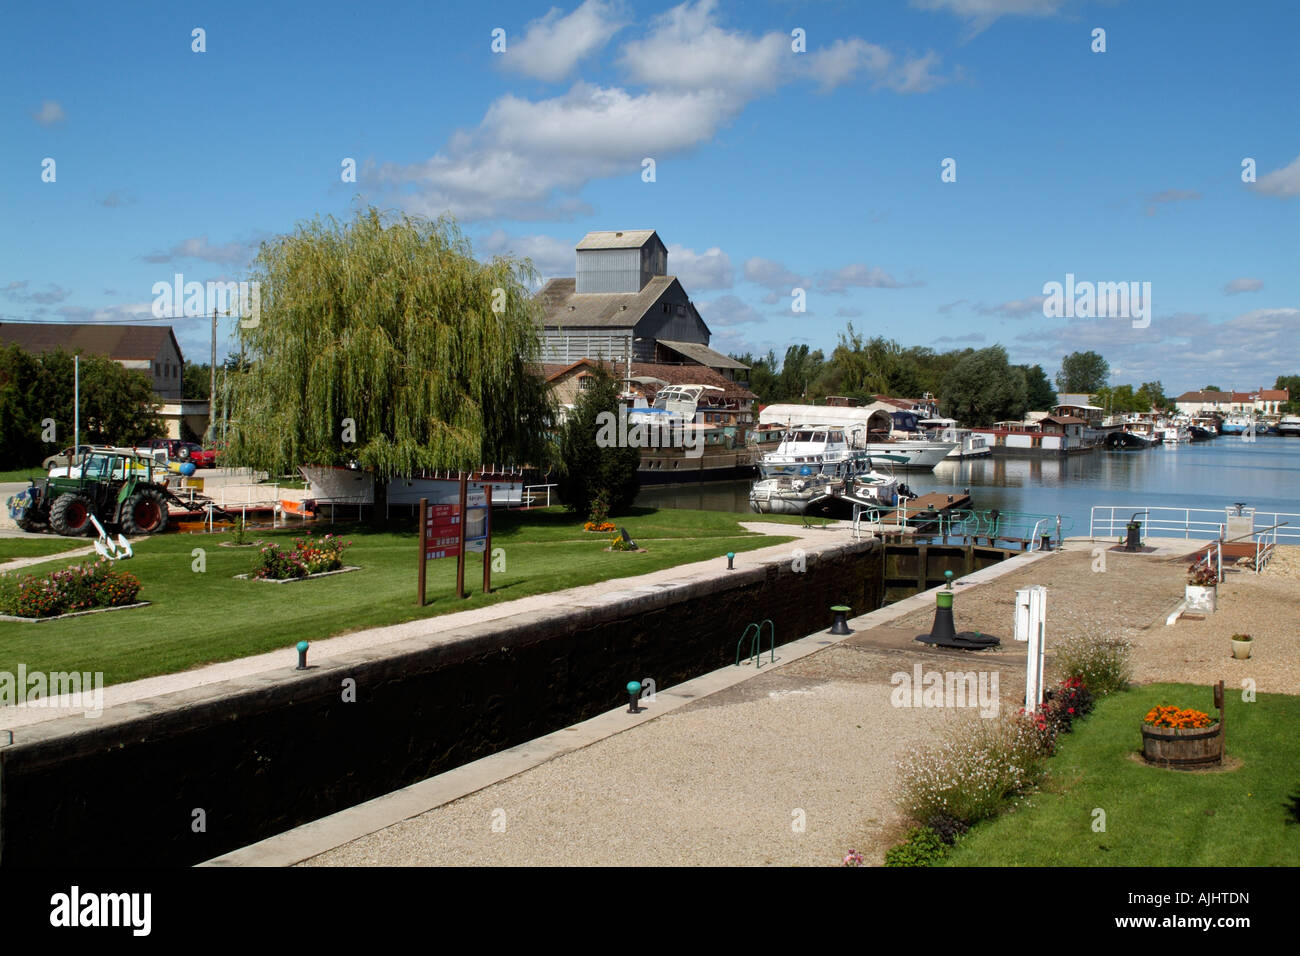 St jean de losne france hi-res stock photography and images - Alamy